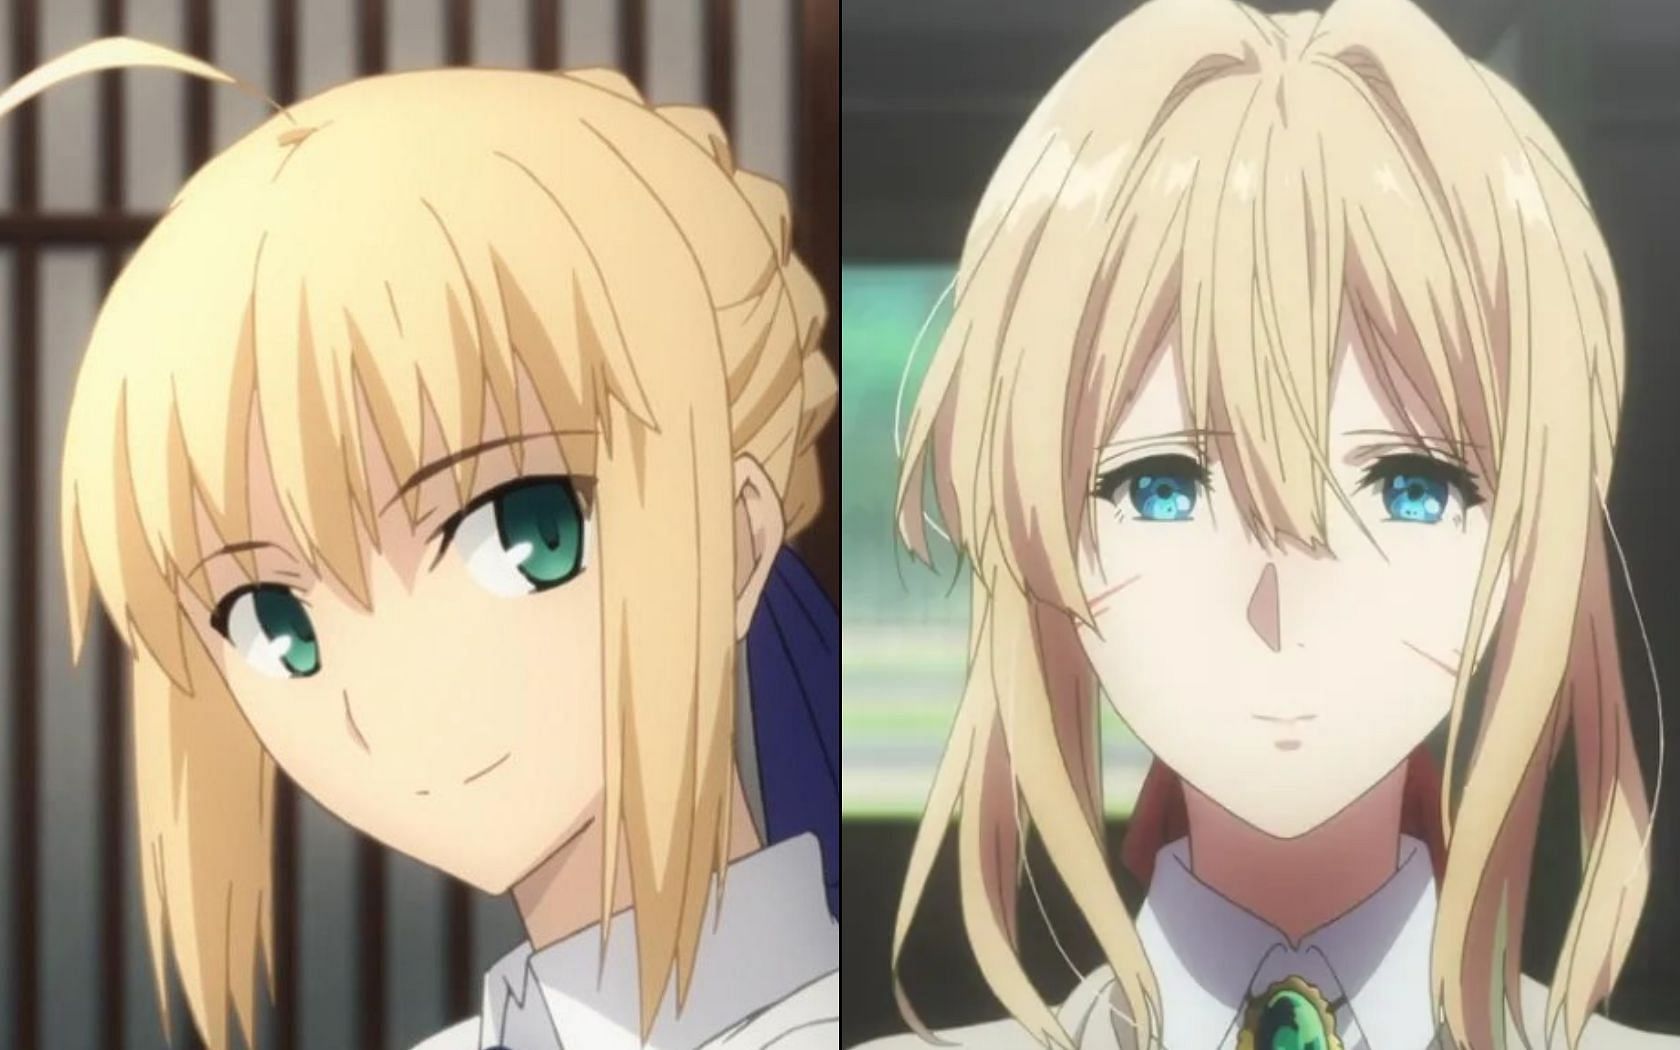 Saber on the left, Violet on the right (Image via Studio Deen, Kyota Animation)